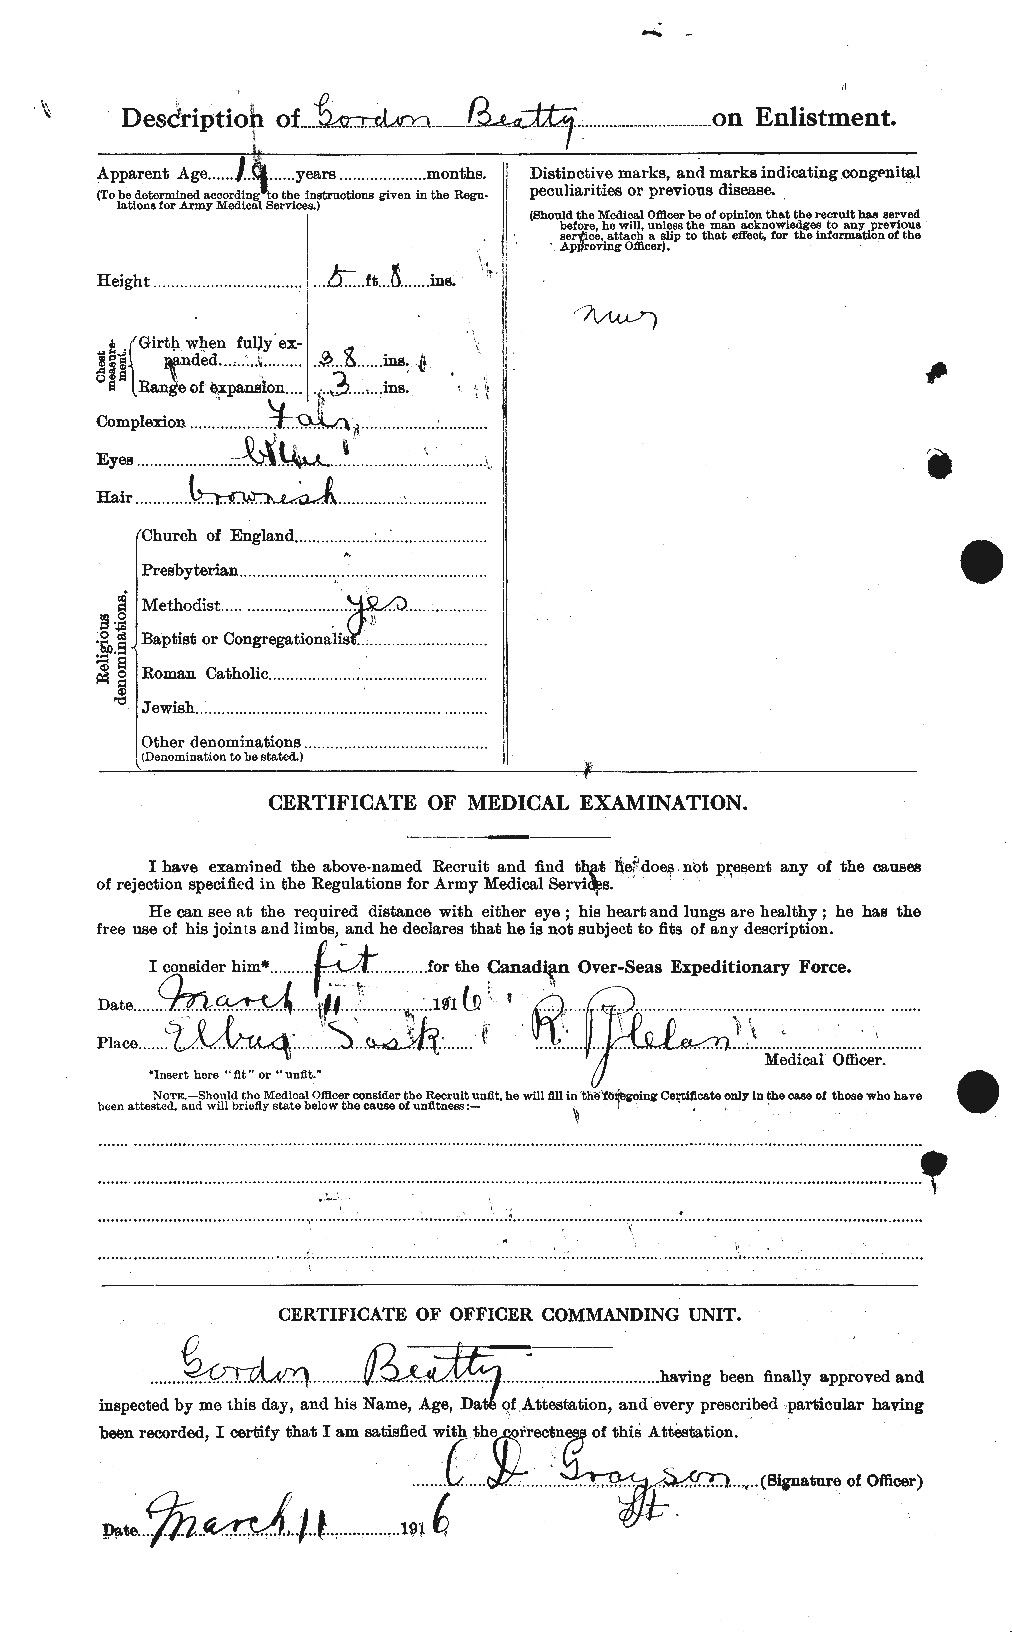 Personnel Records of the First World War - CEF 236378b